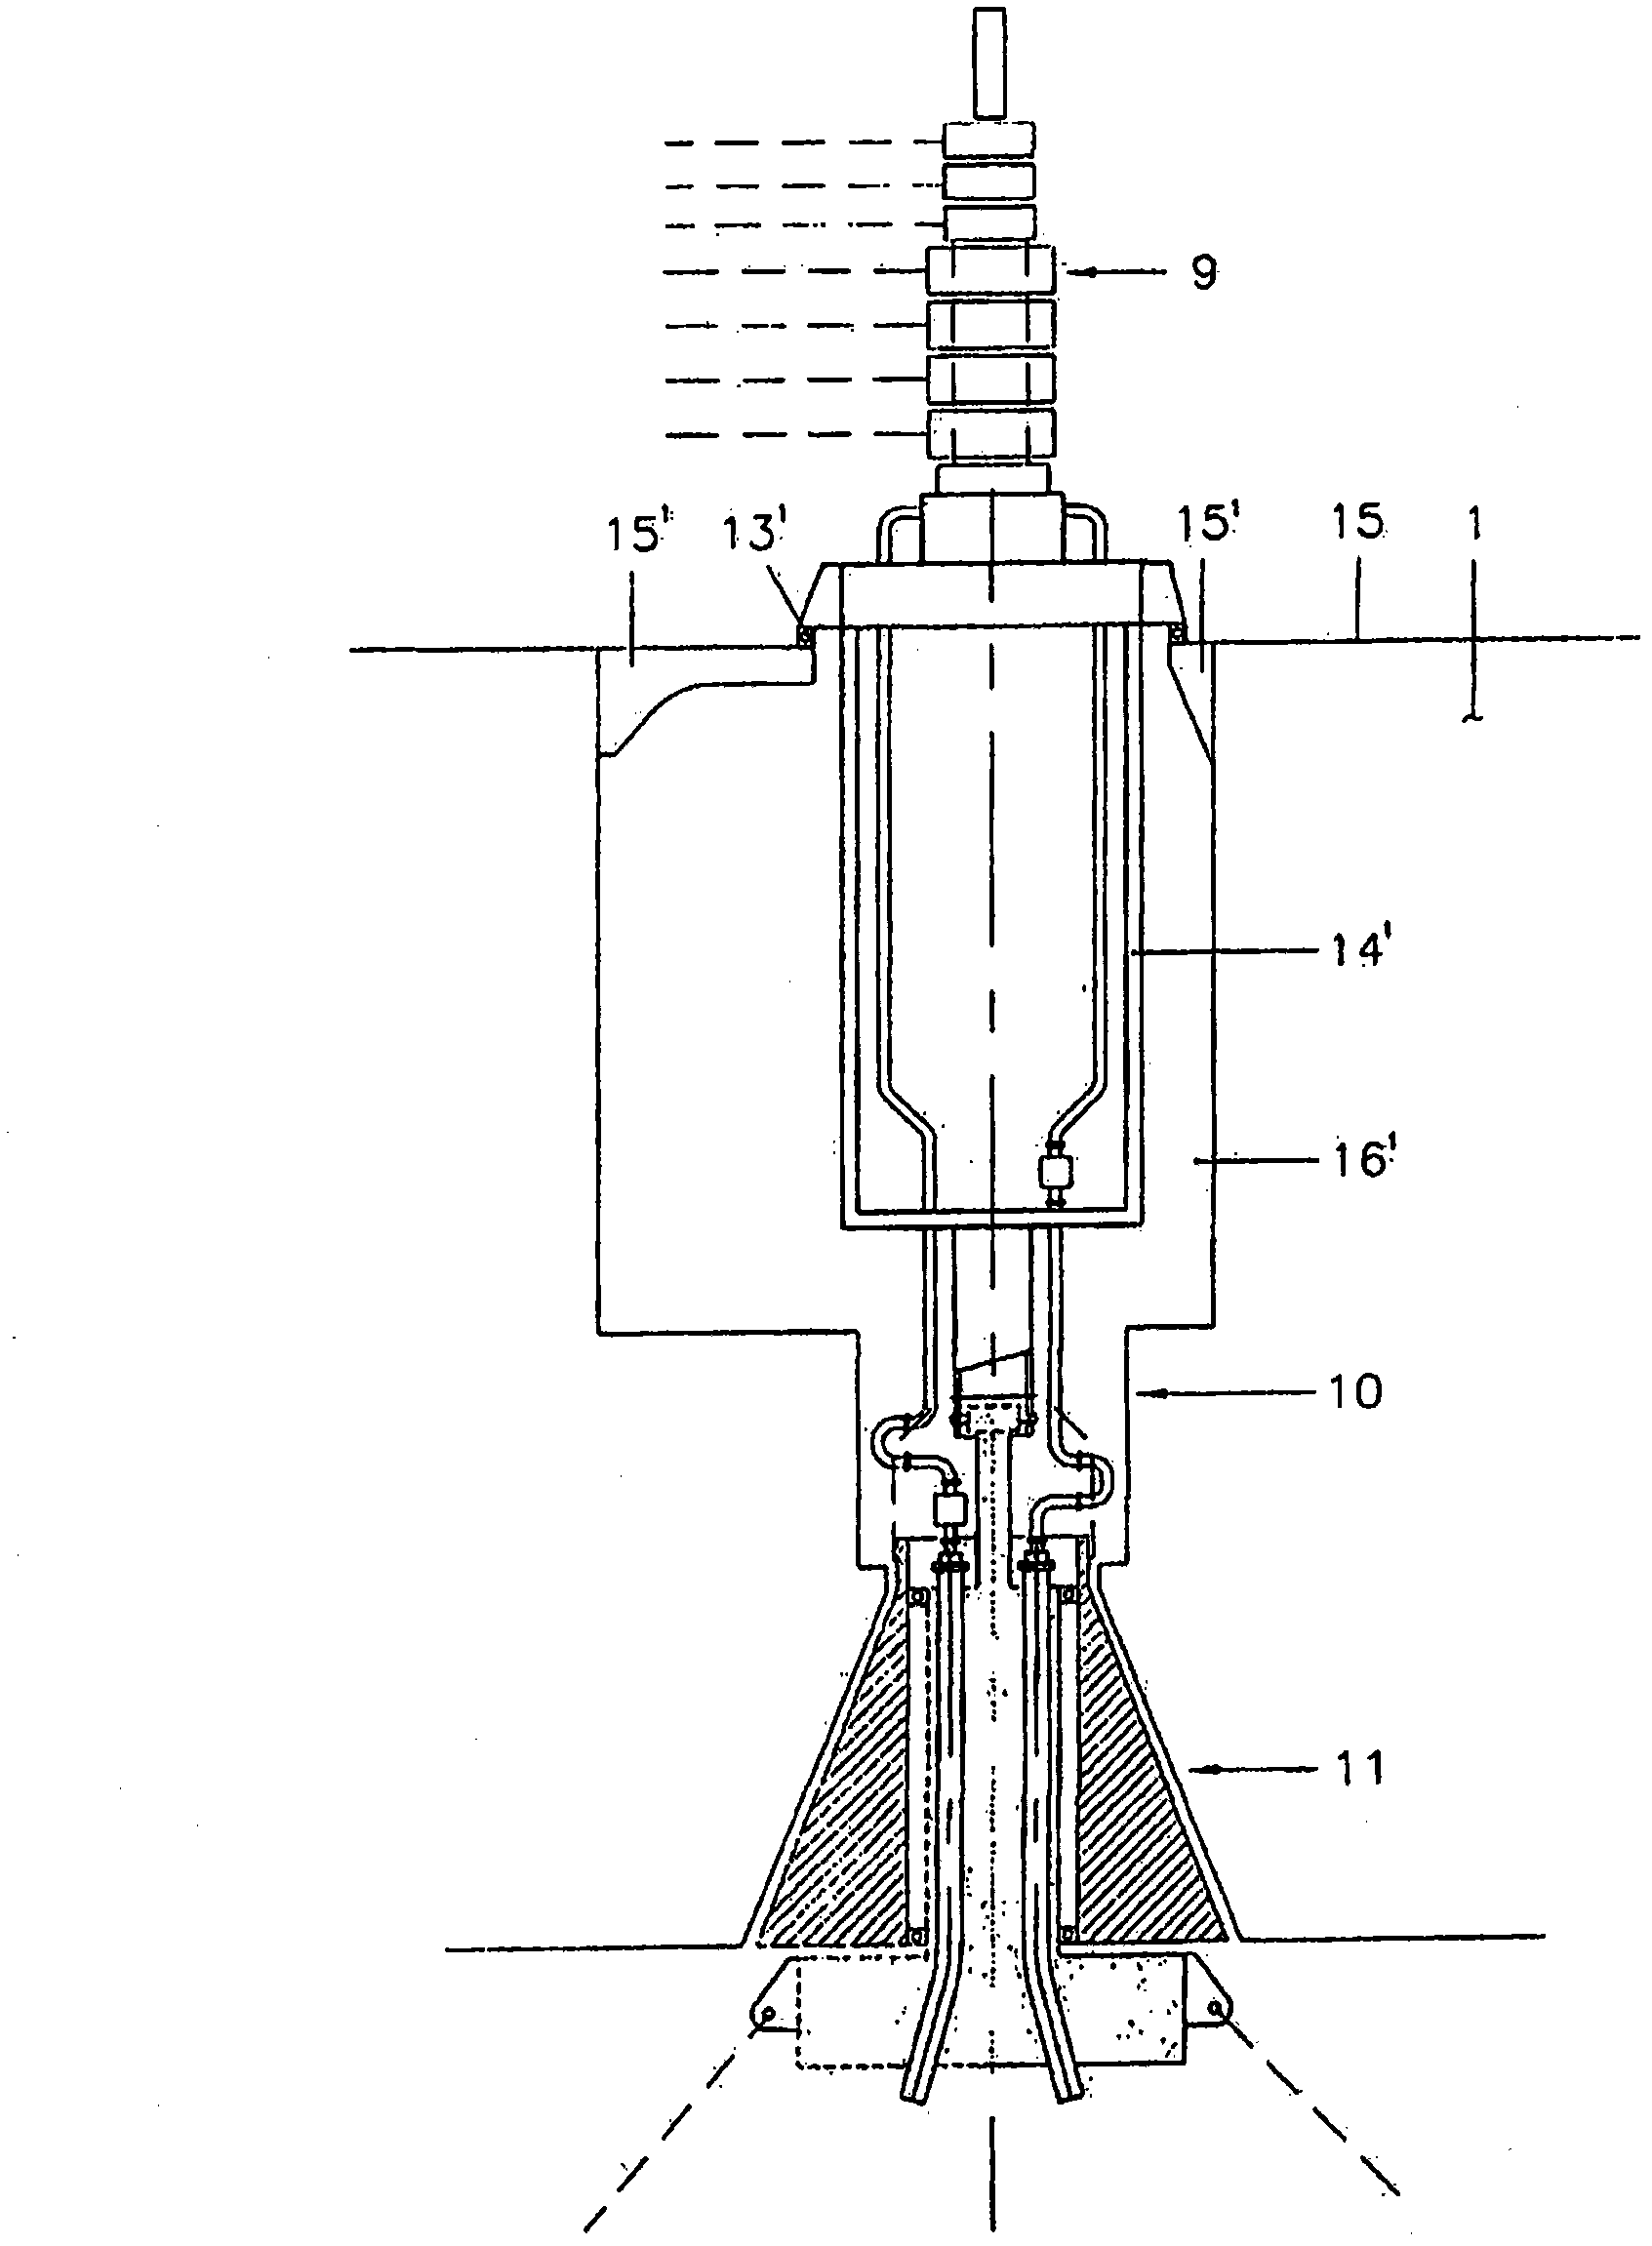 Disconnectable mooring assembly